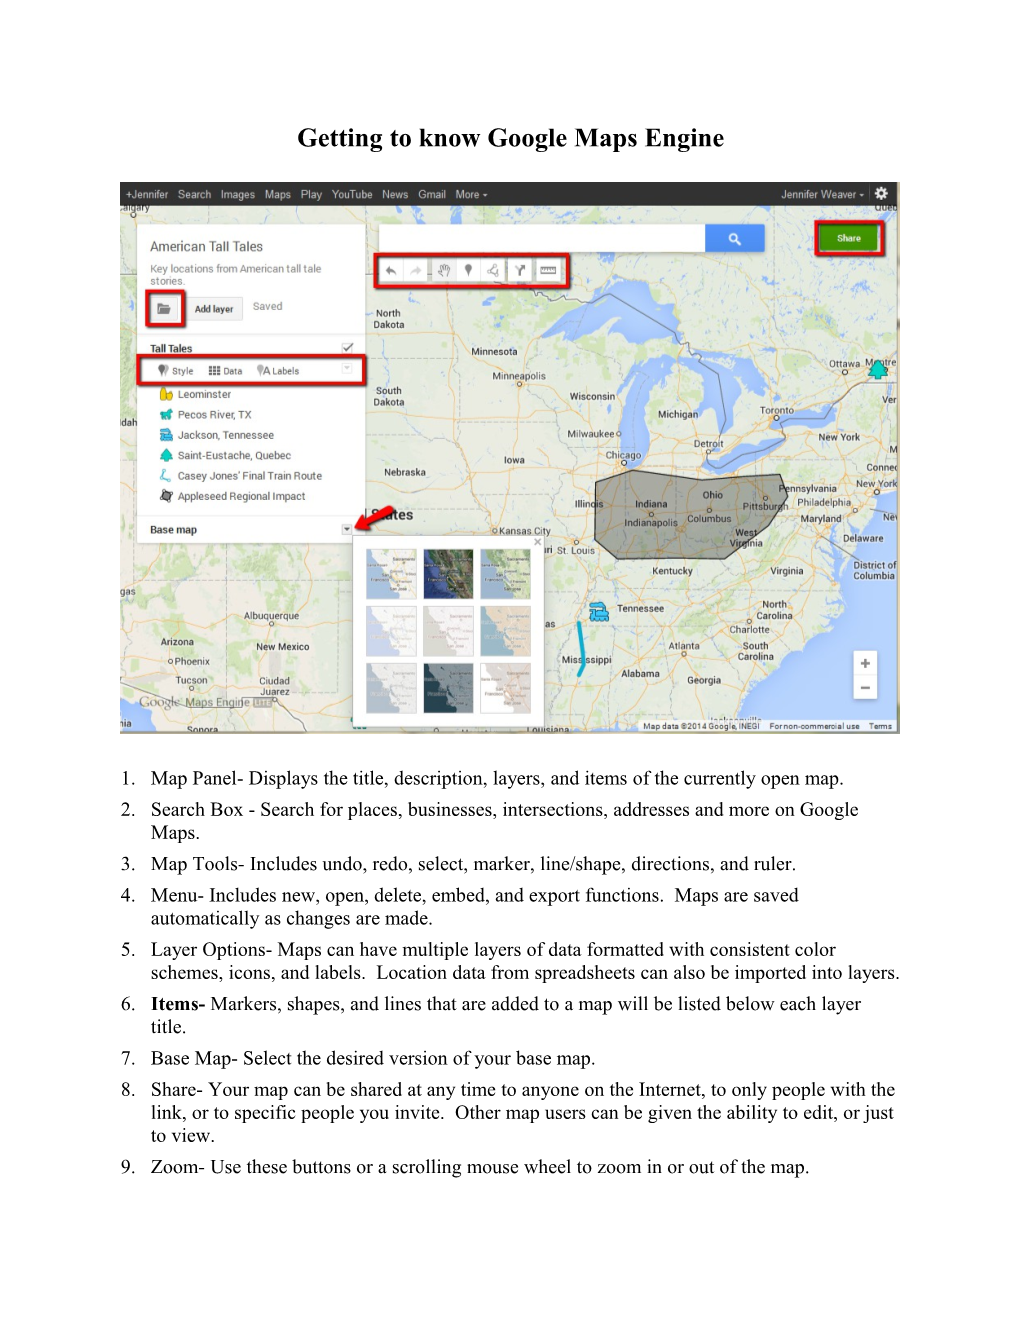 Getting to Know Google Maps Engine